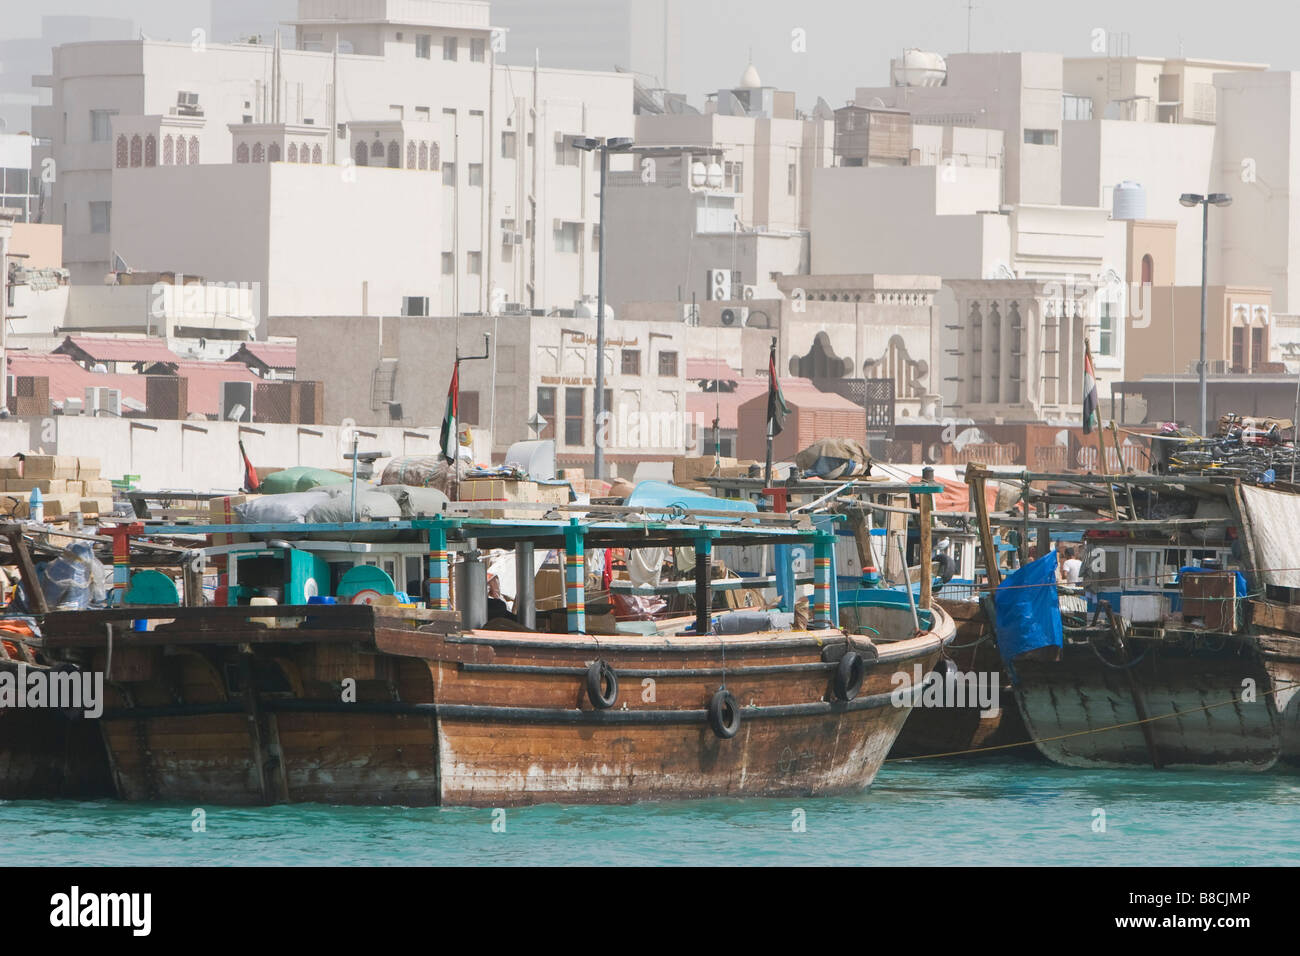 Dubai, UAE, Dhows, old wooden sailing vessels, are docked along the Deira side of Dubai Creek. Stock Photo